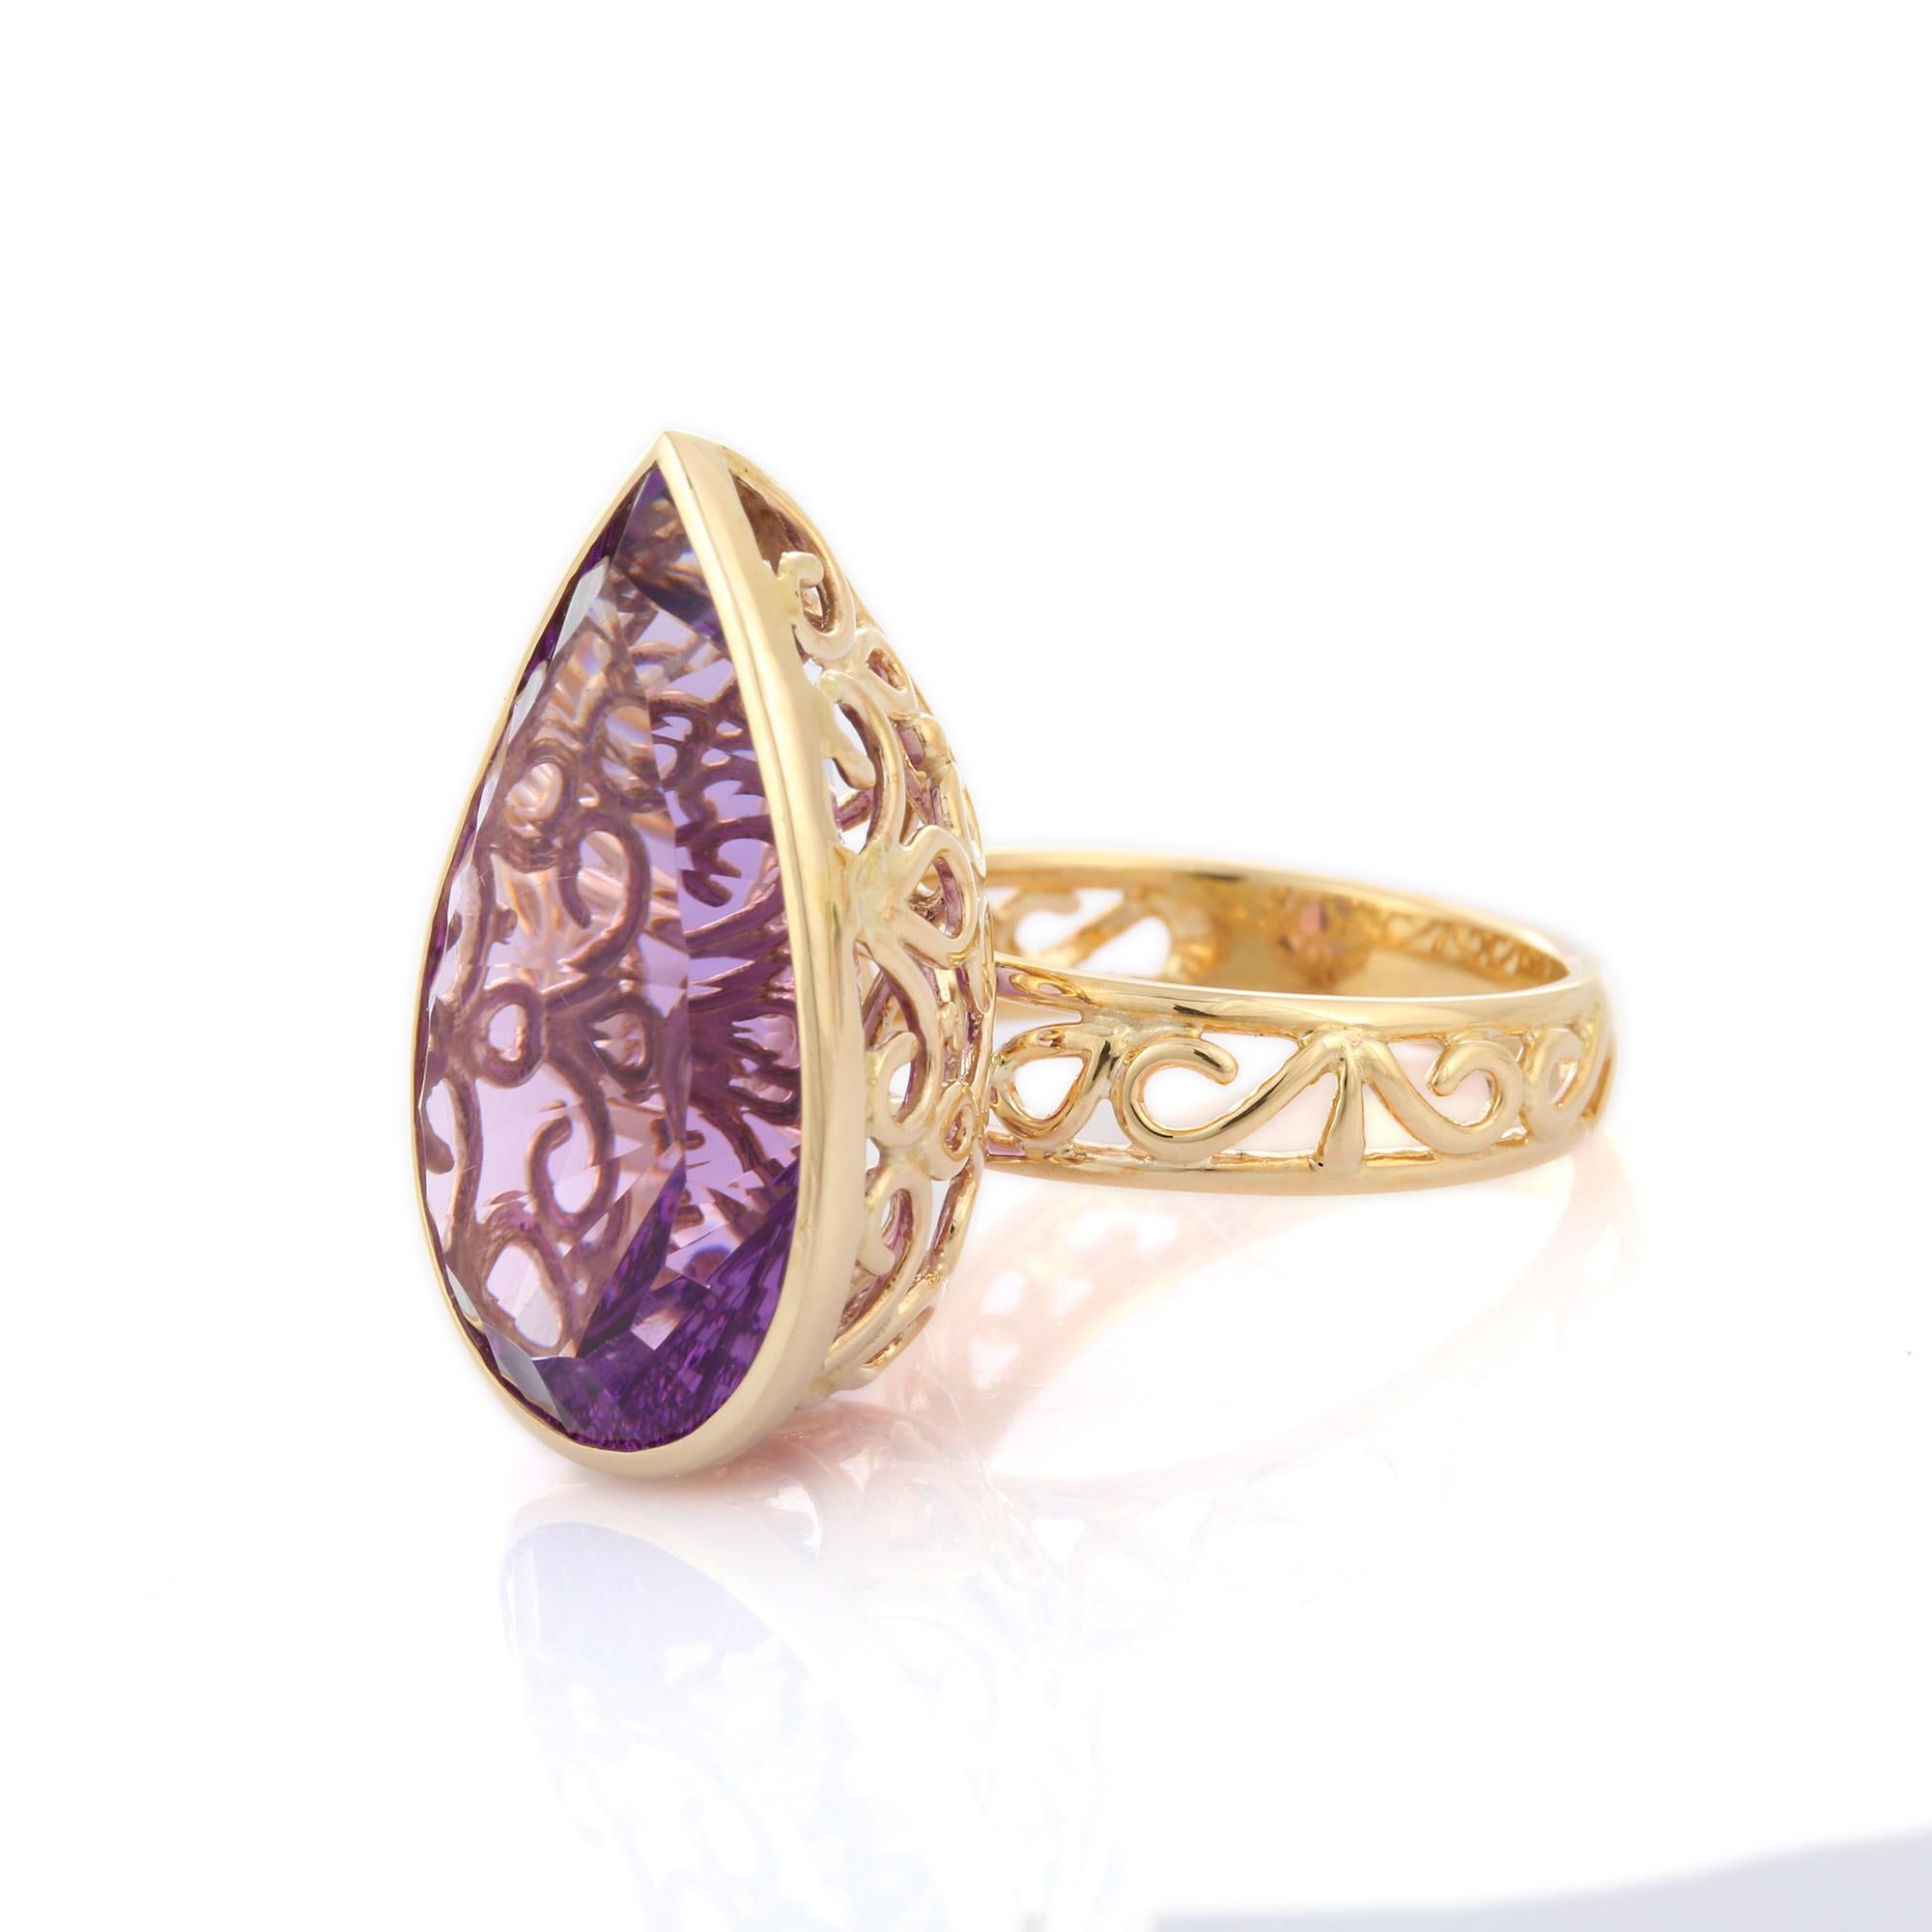 For Sale:  18.2 Carat Pear Cut Amethyst Cocktail Ring in 14K Yellow Gold 3